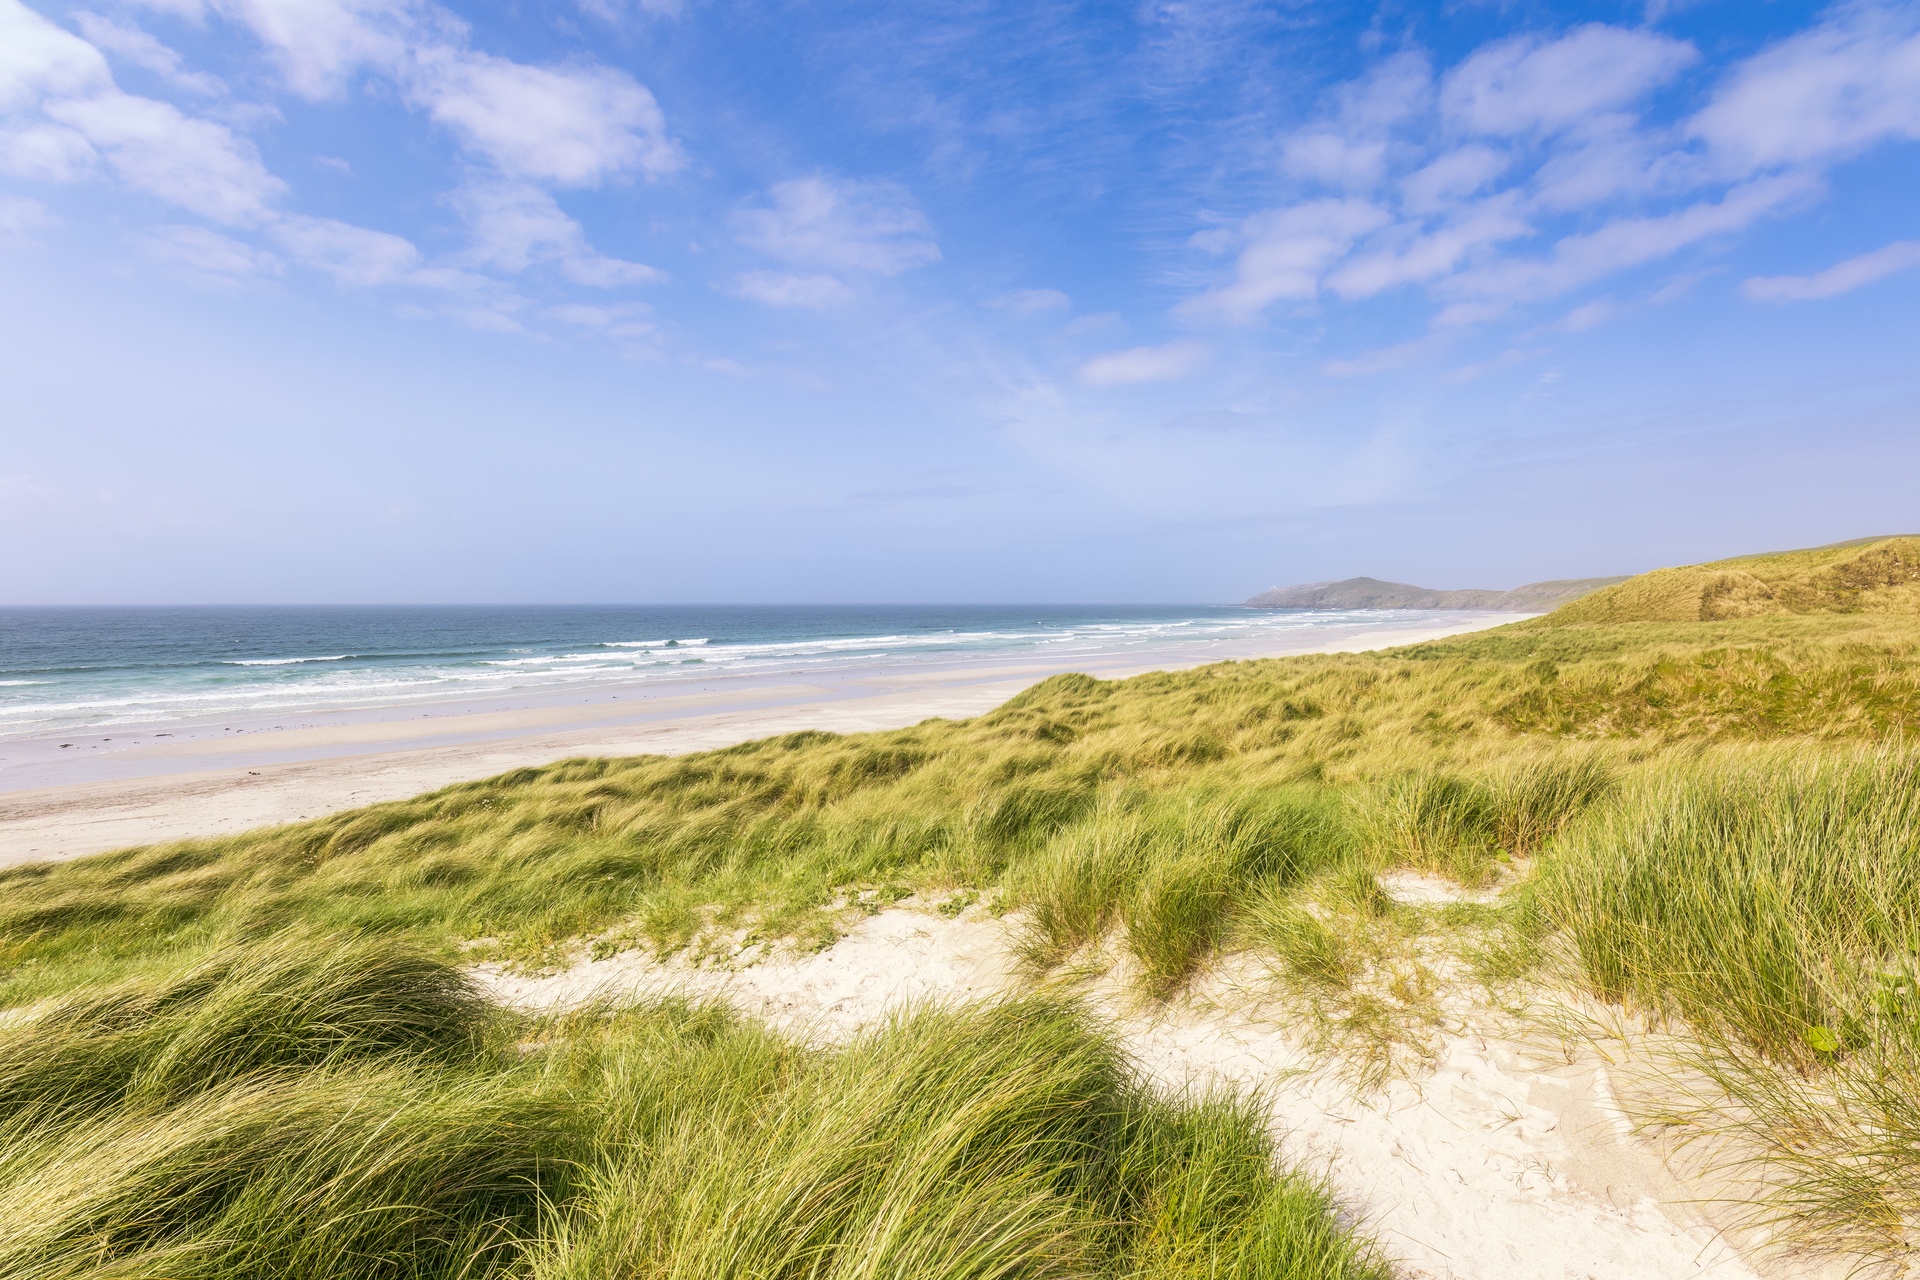 Traigh Eais is famed for its sand dunes and provided the setting for the 1948 film.